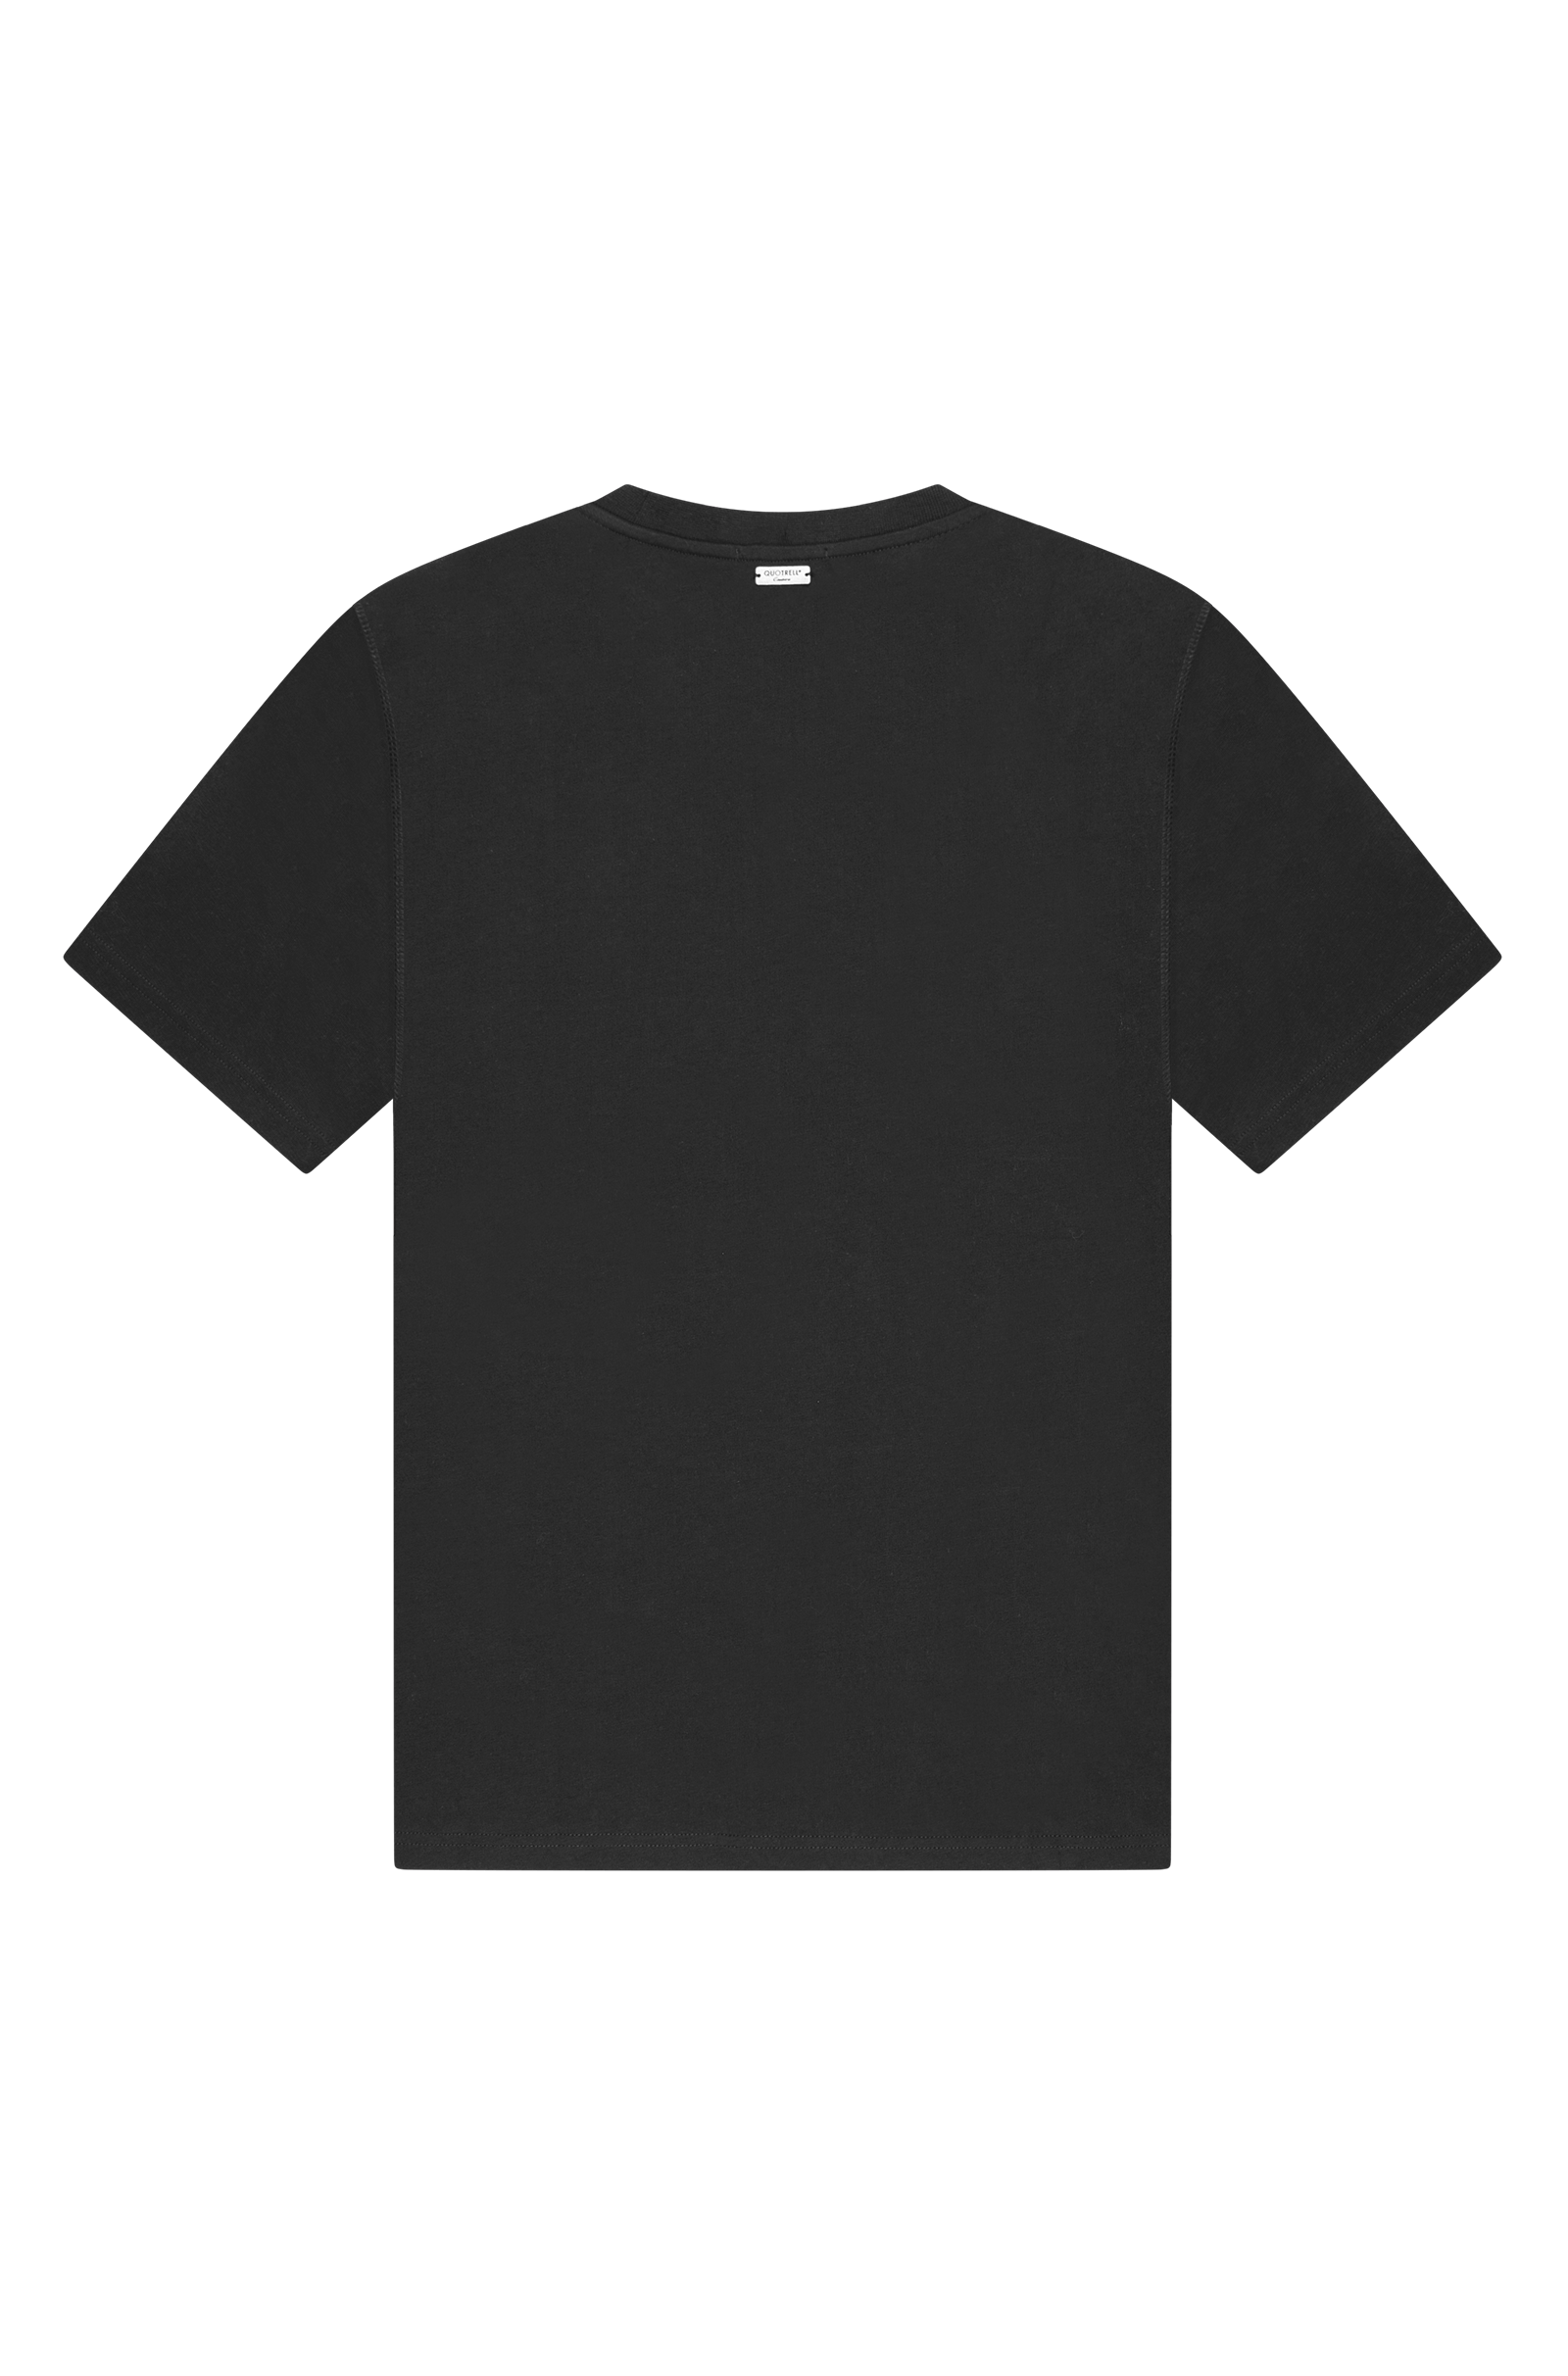 Quotrell Florence T-shirt